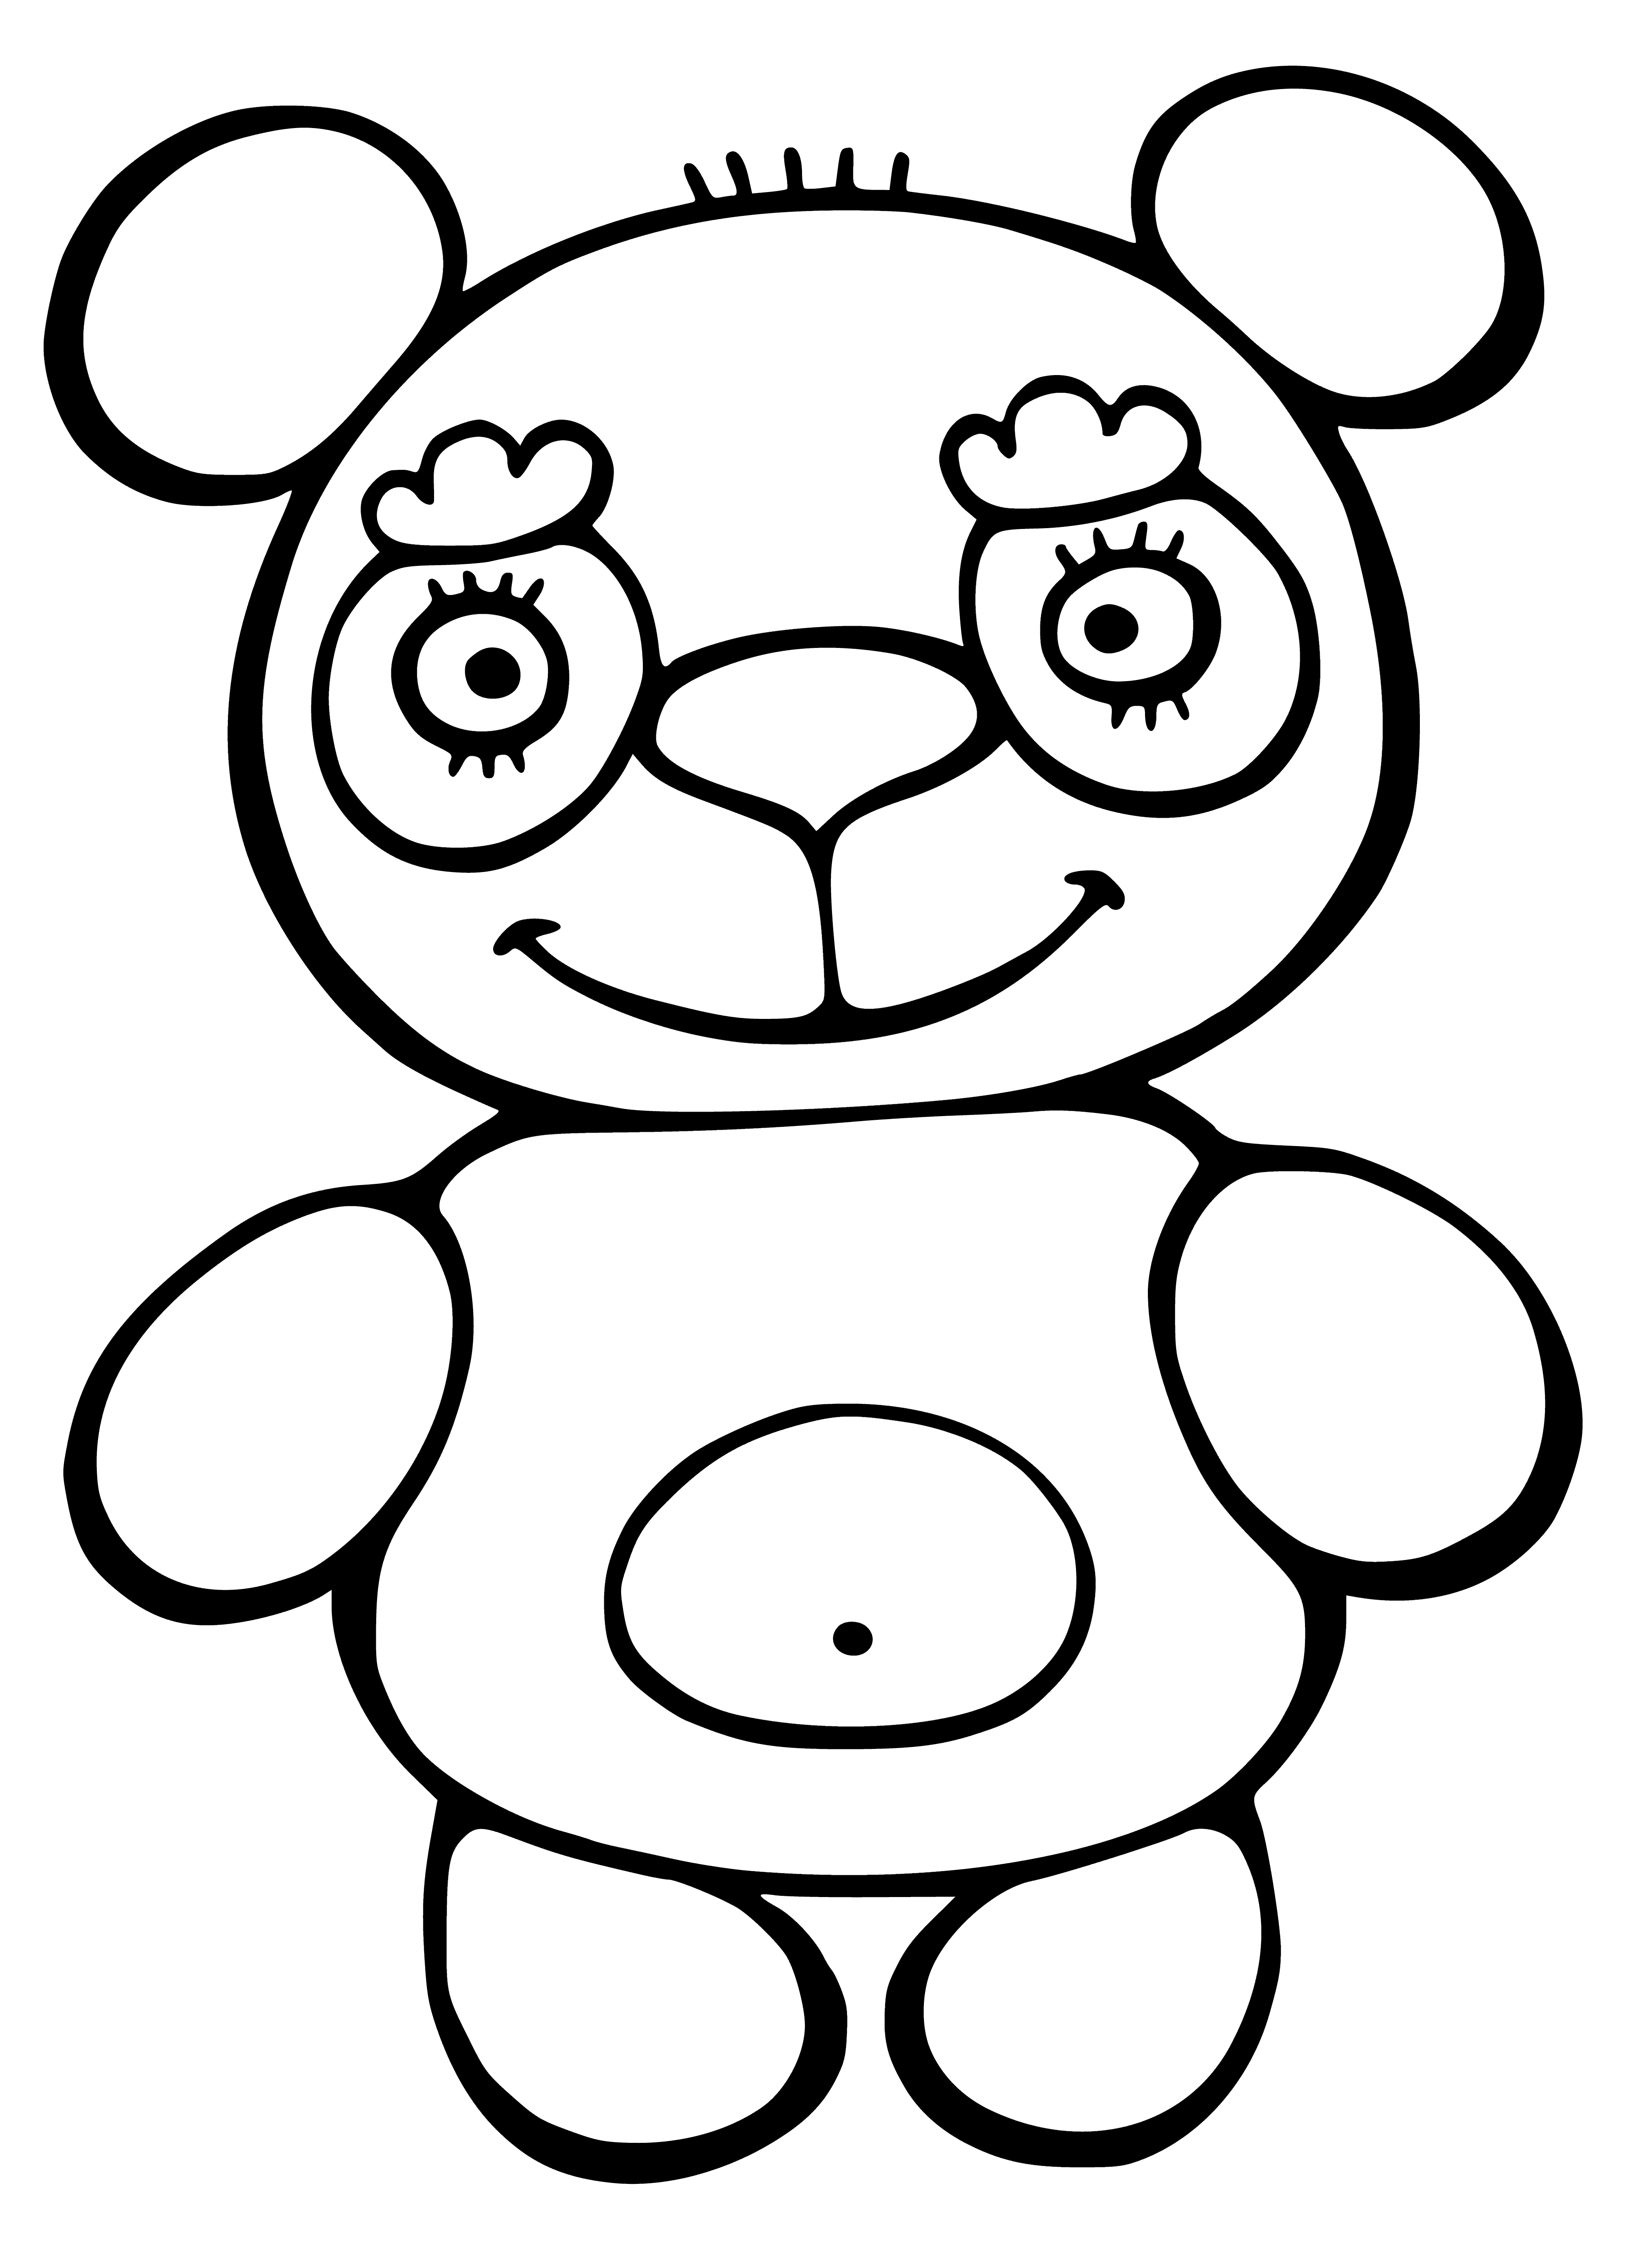 coloring page: A large brown bear stands on all fours in a forest, sharp teeth bared and shaggy fur thick. Eyes small, head turned to the side.